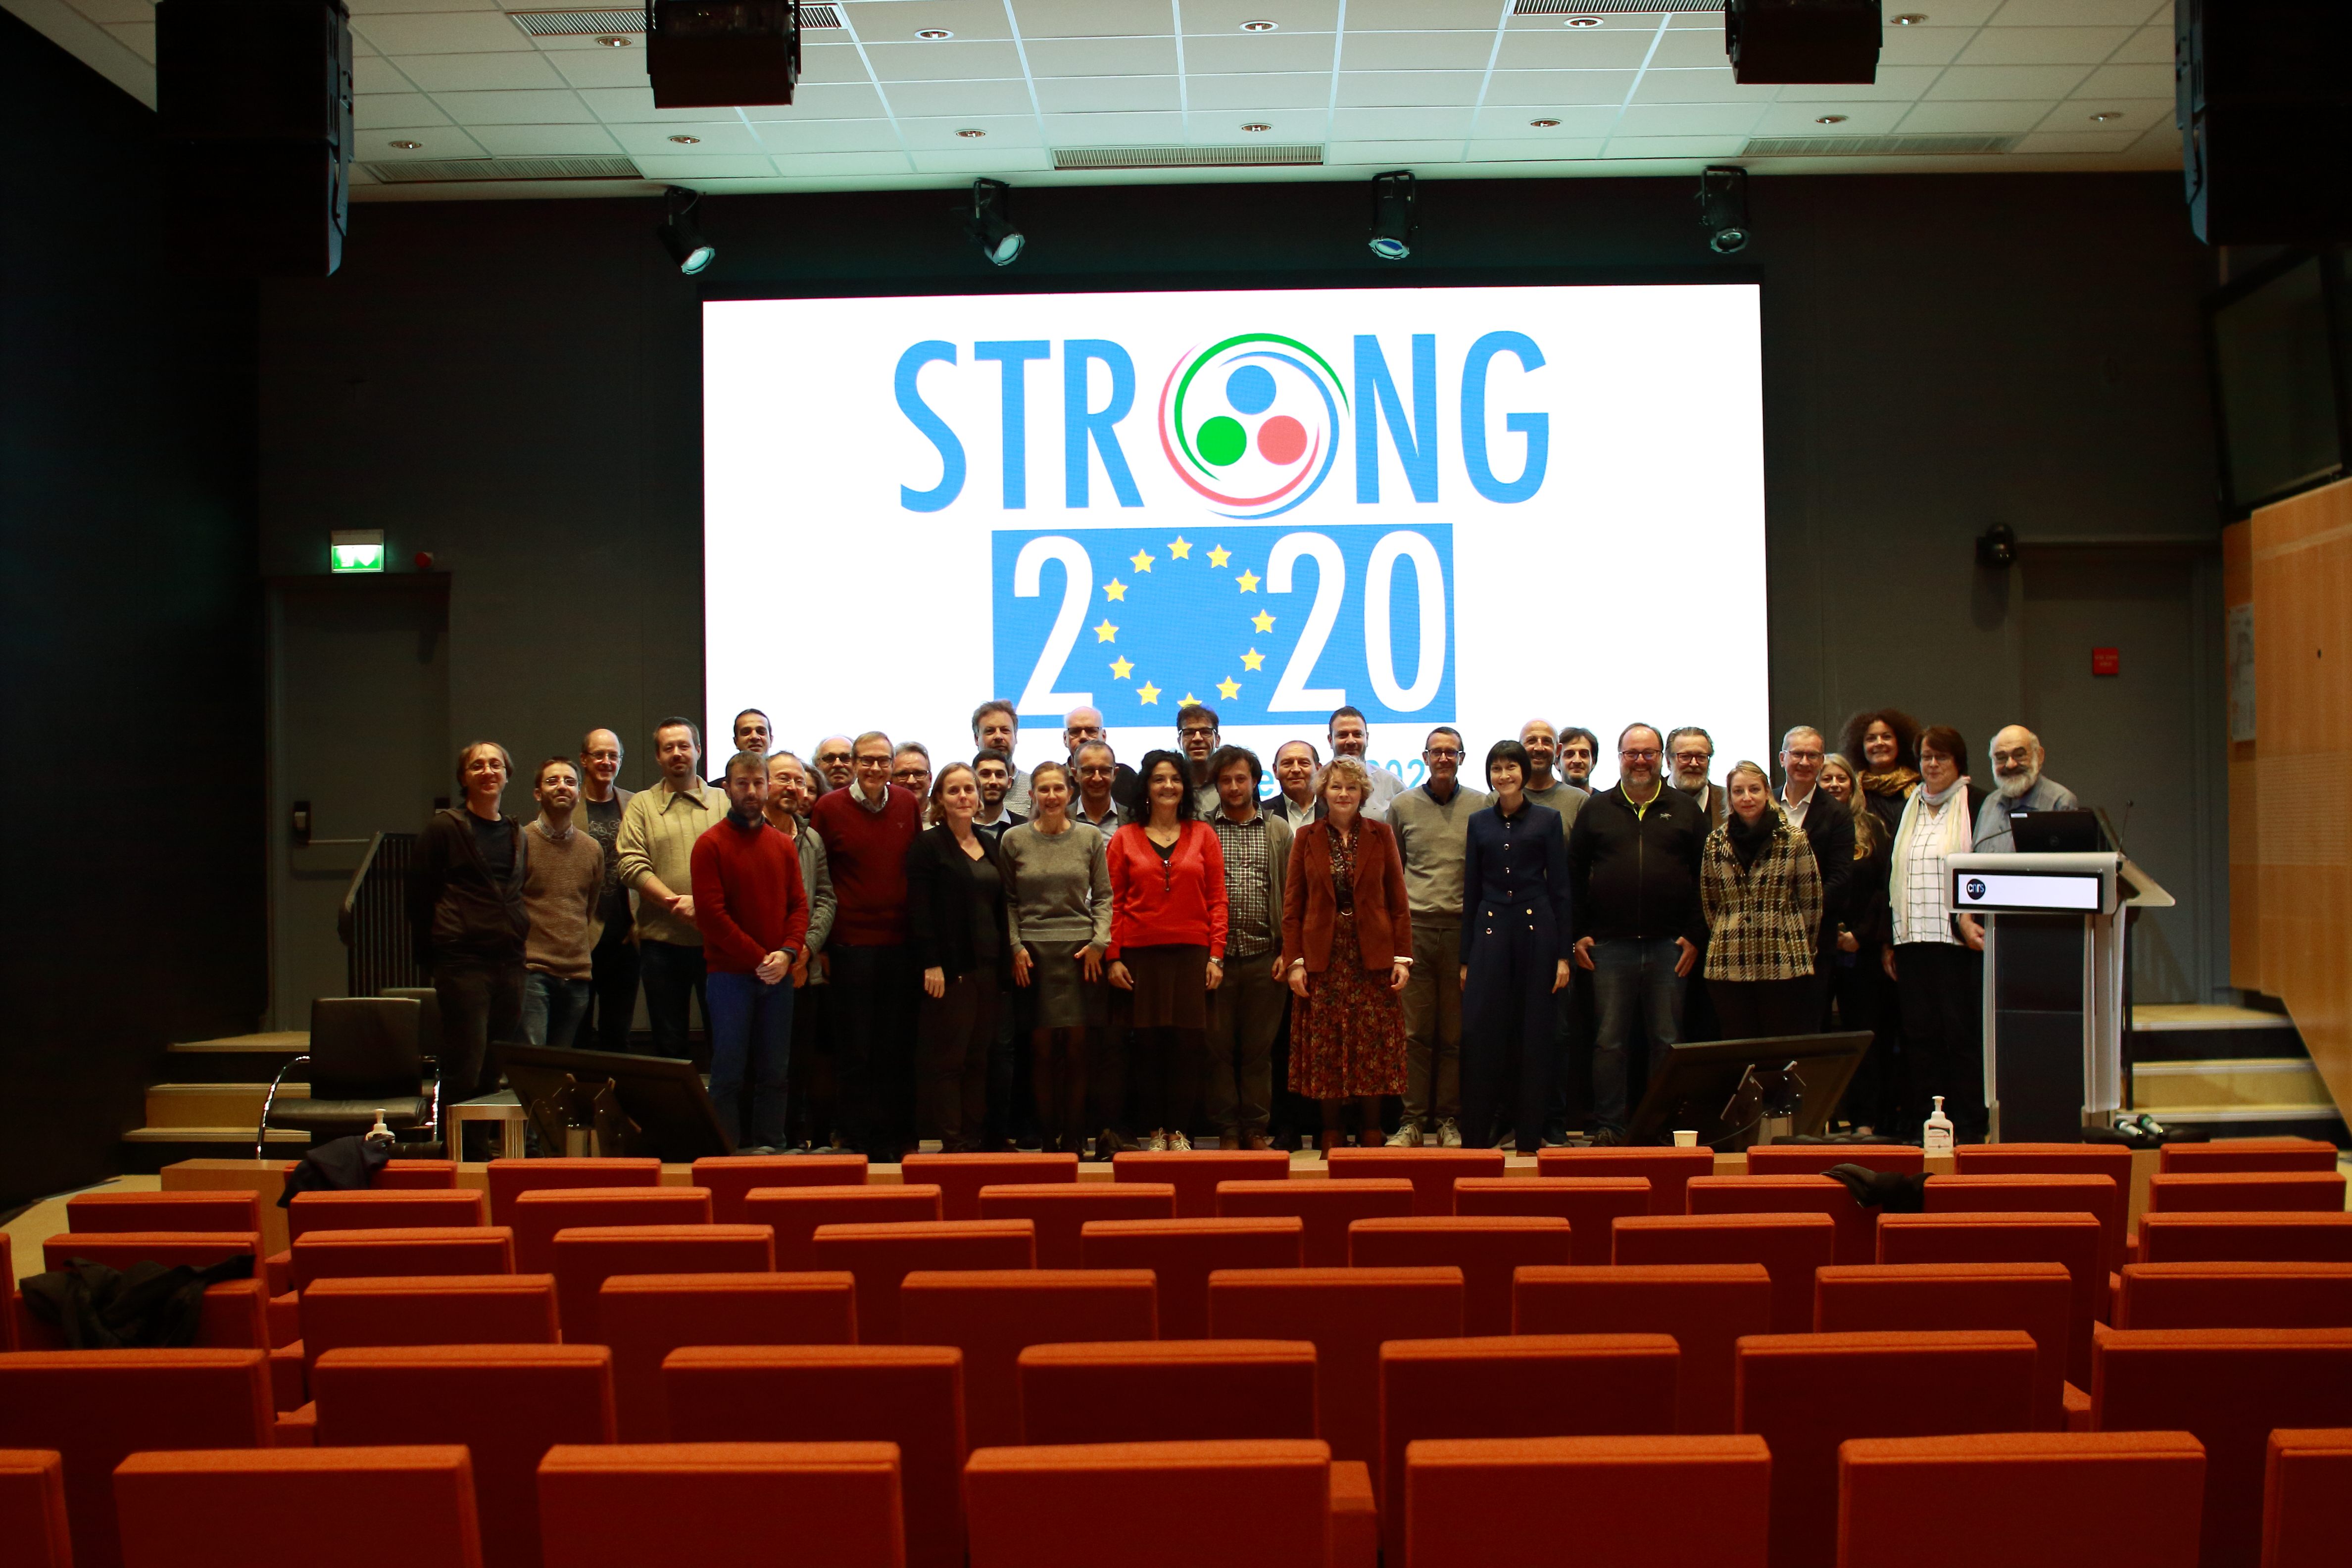 STRONG-2020 Annual Meeting,  CNRS/IN2P3, Paris, 18-19 October 2022